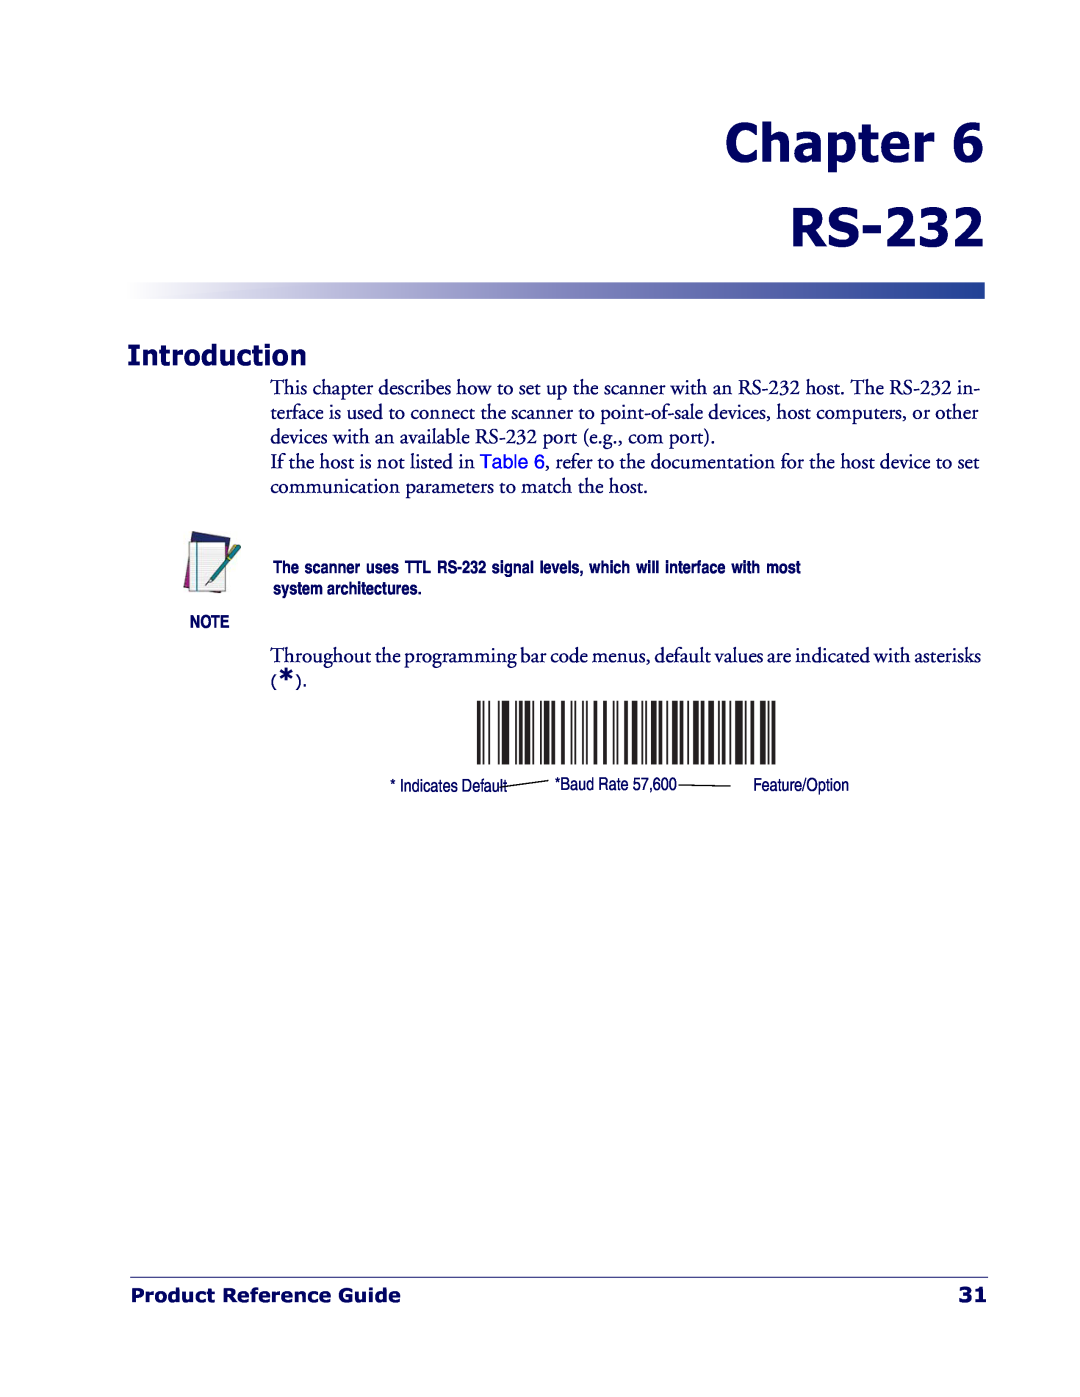 Datalogic Scanning QD 2300 manual Chapter RS-232, Introduction 